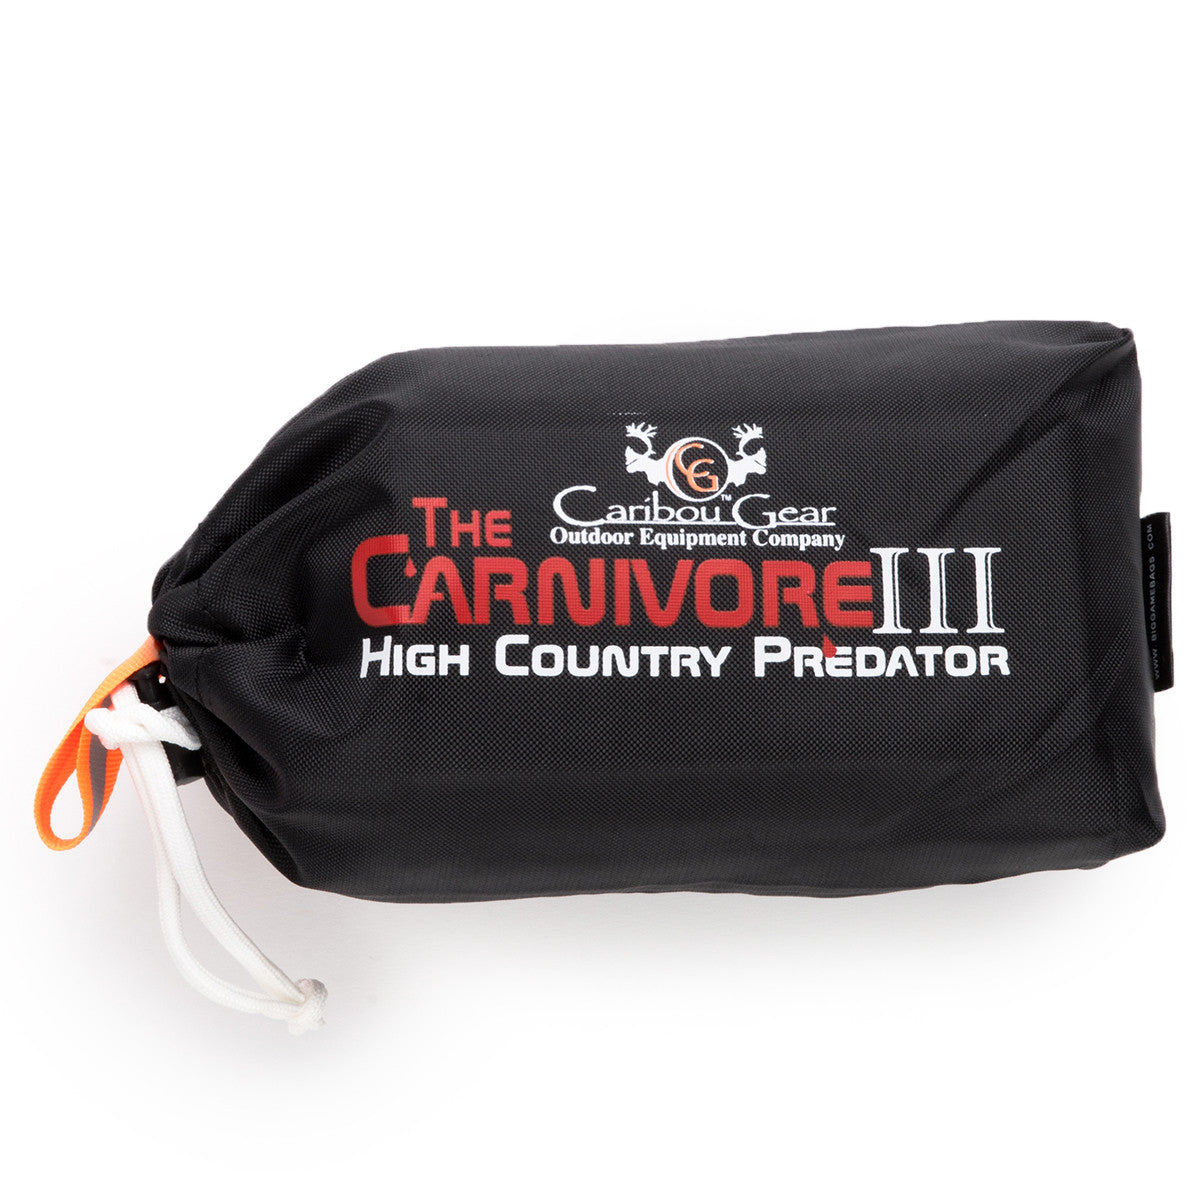 Caribou Gear “The Carnivore III” High Country Game Bag Set in Caribou Gear “The Carnivore III” High Country Game Bag Set - goHUNT Shop by GOHUNT | Caribou Gear - GOHUNT Shop